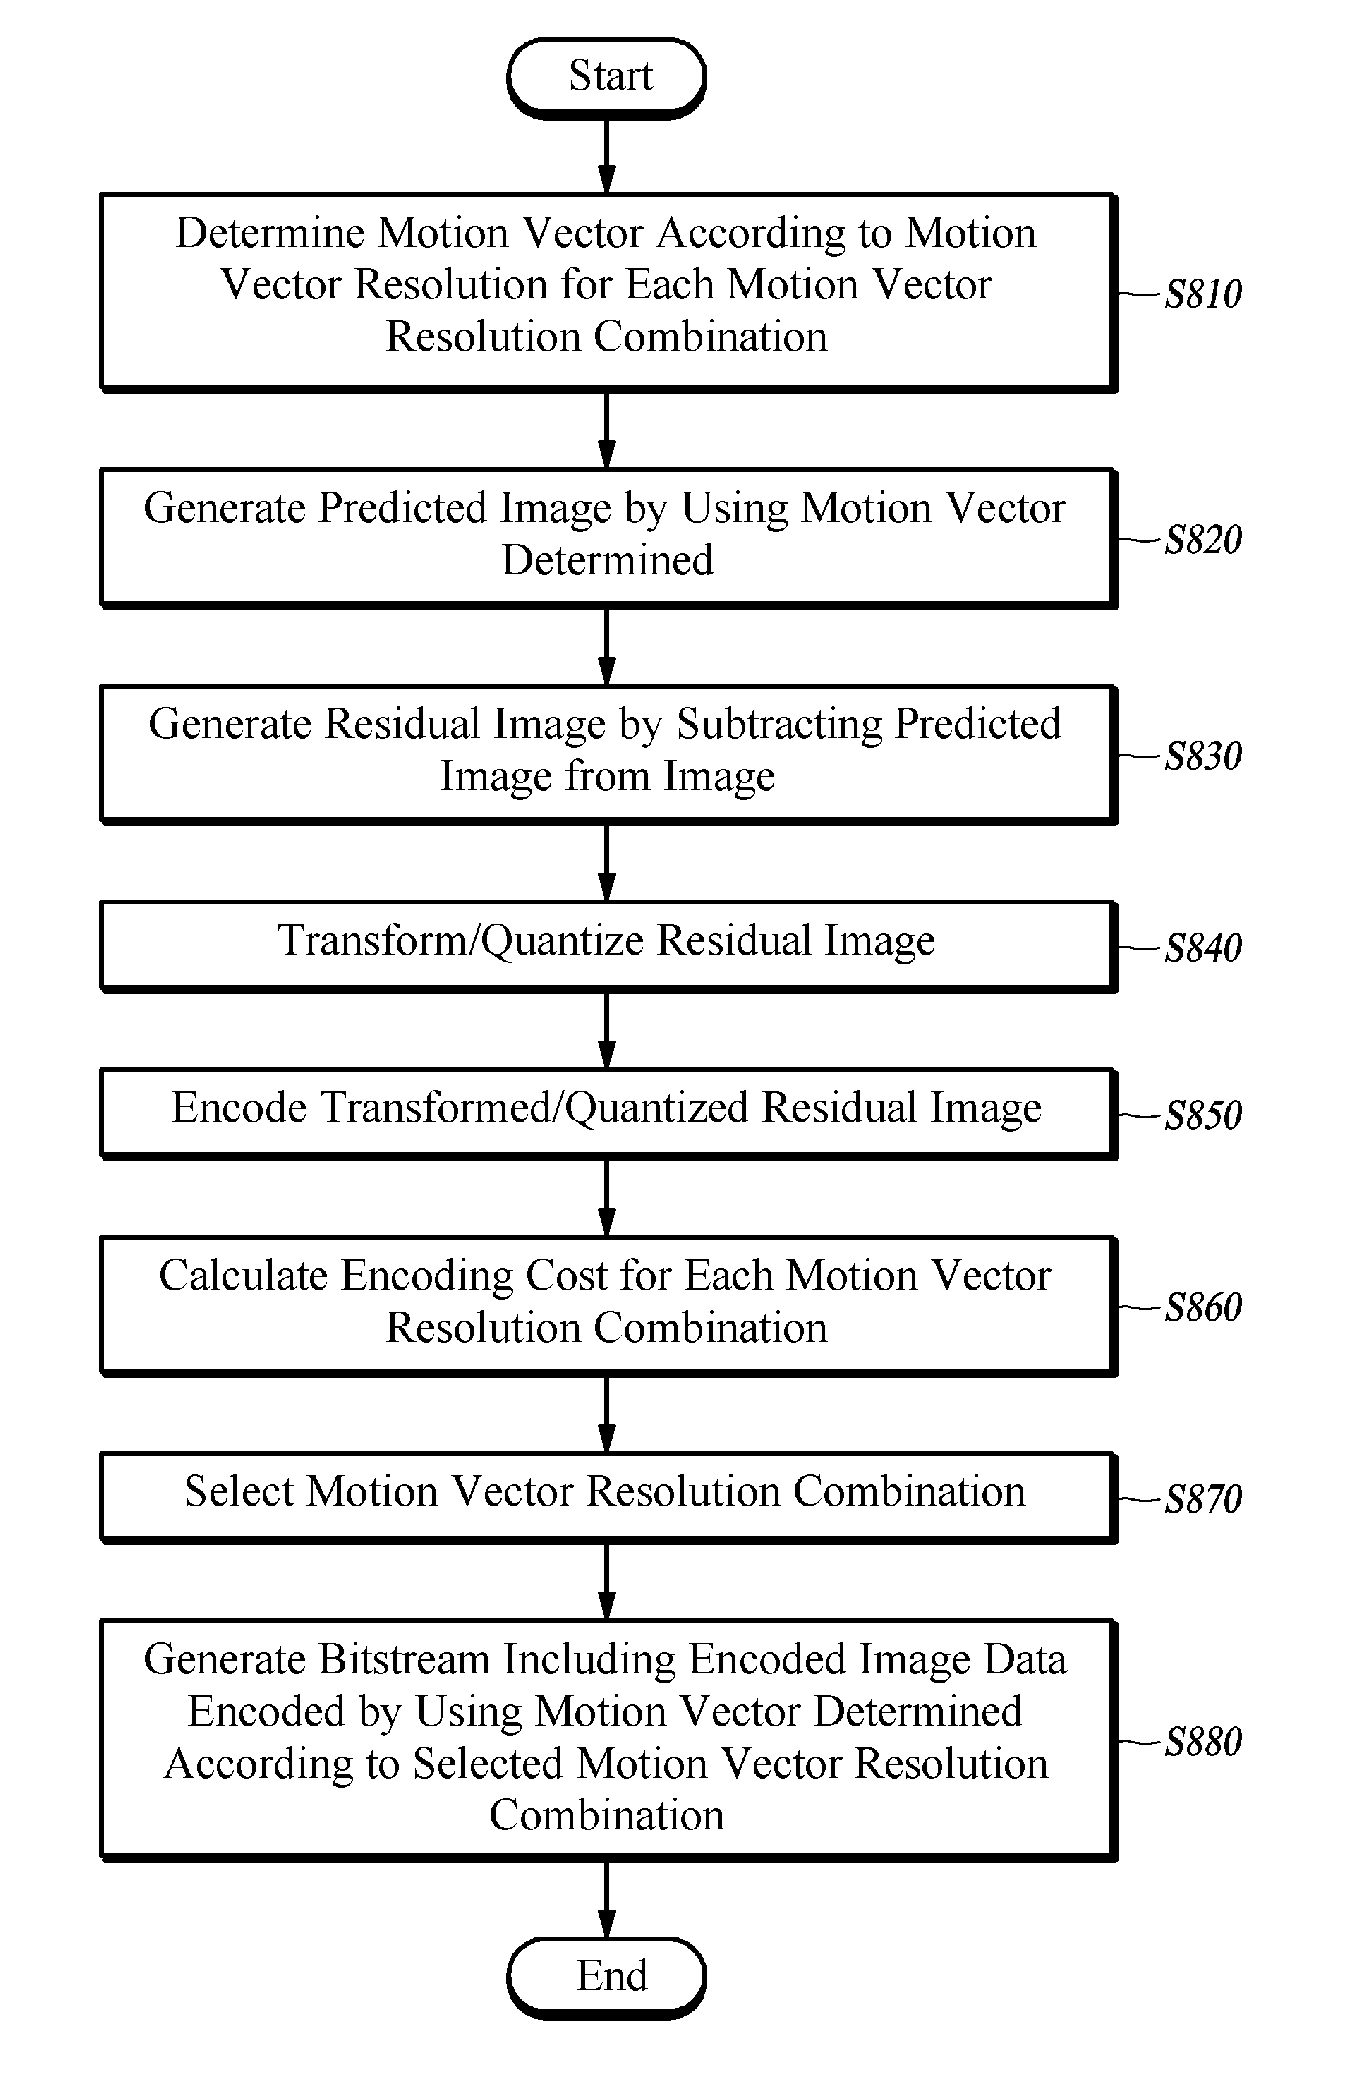 Motion vector encoding/decoding method and apparatus using a motion vector resolution combination, and image encoding/decoding method and apparatus using same